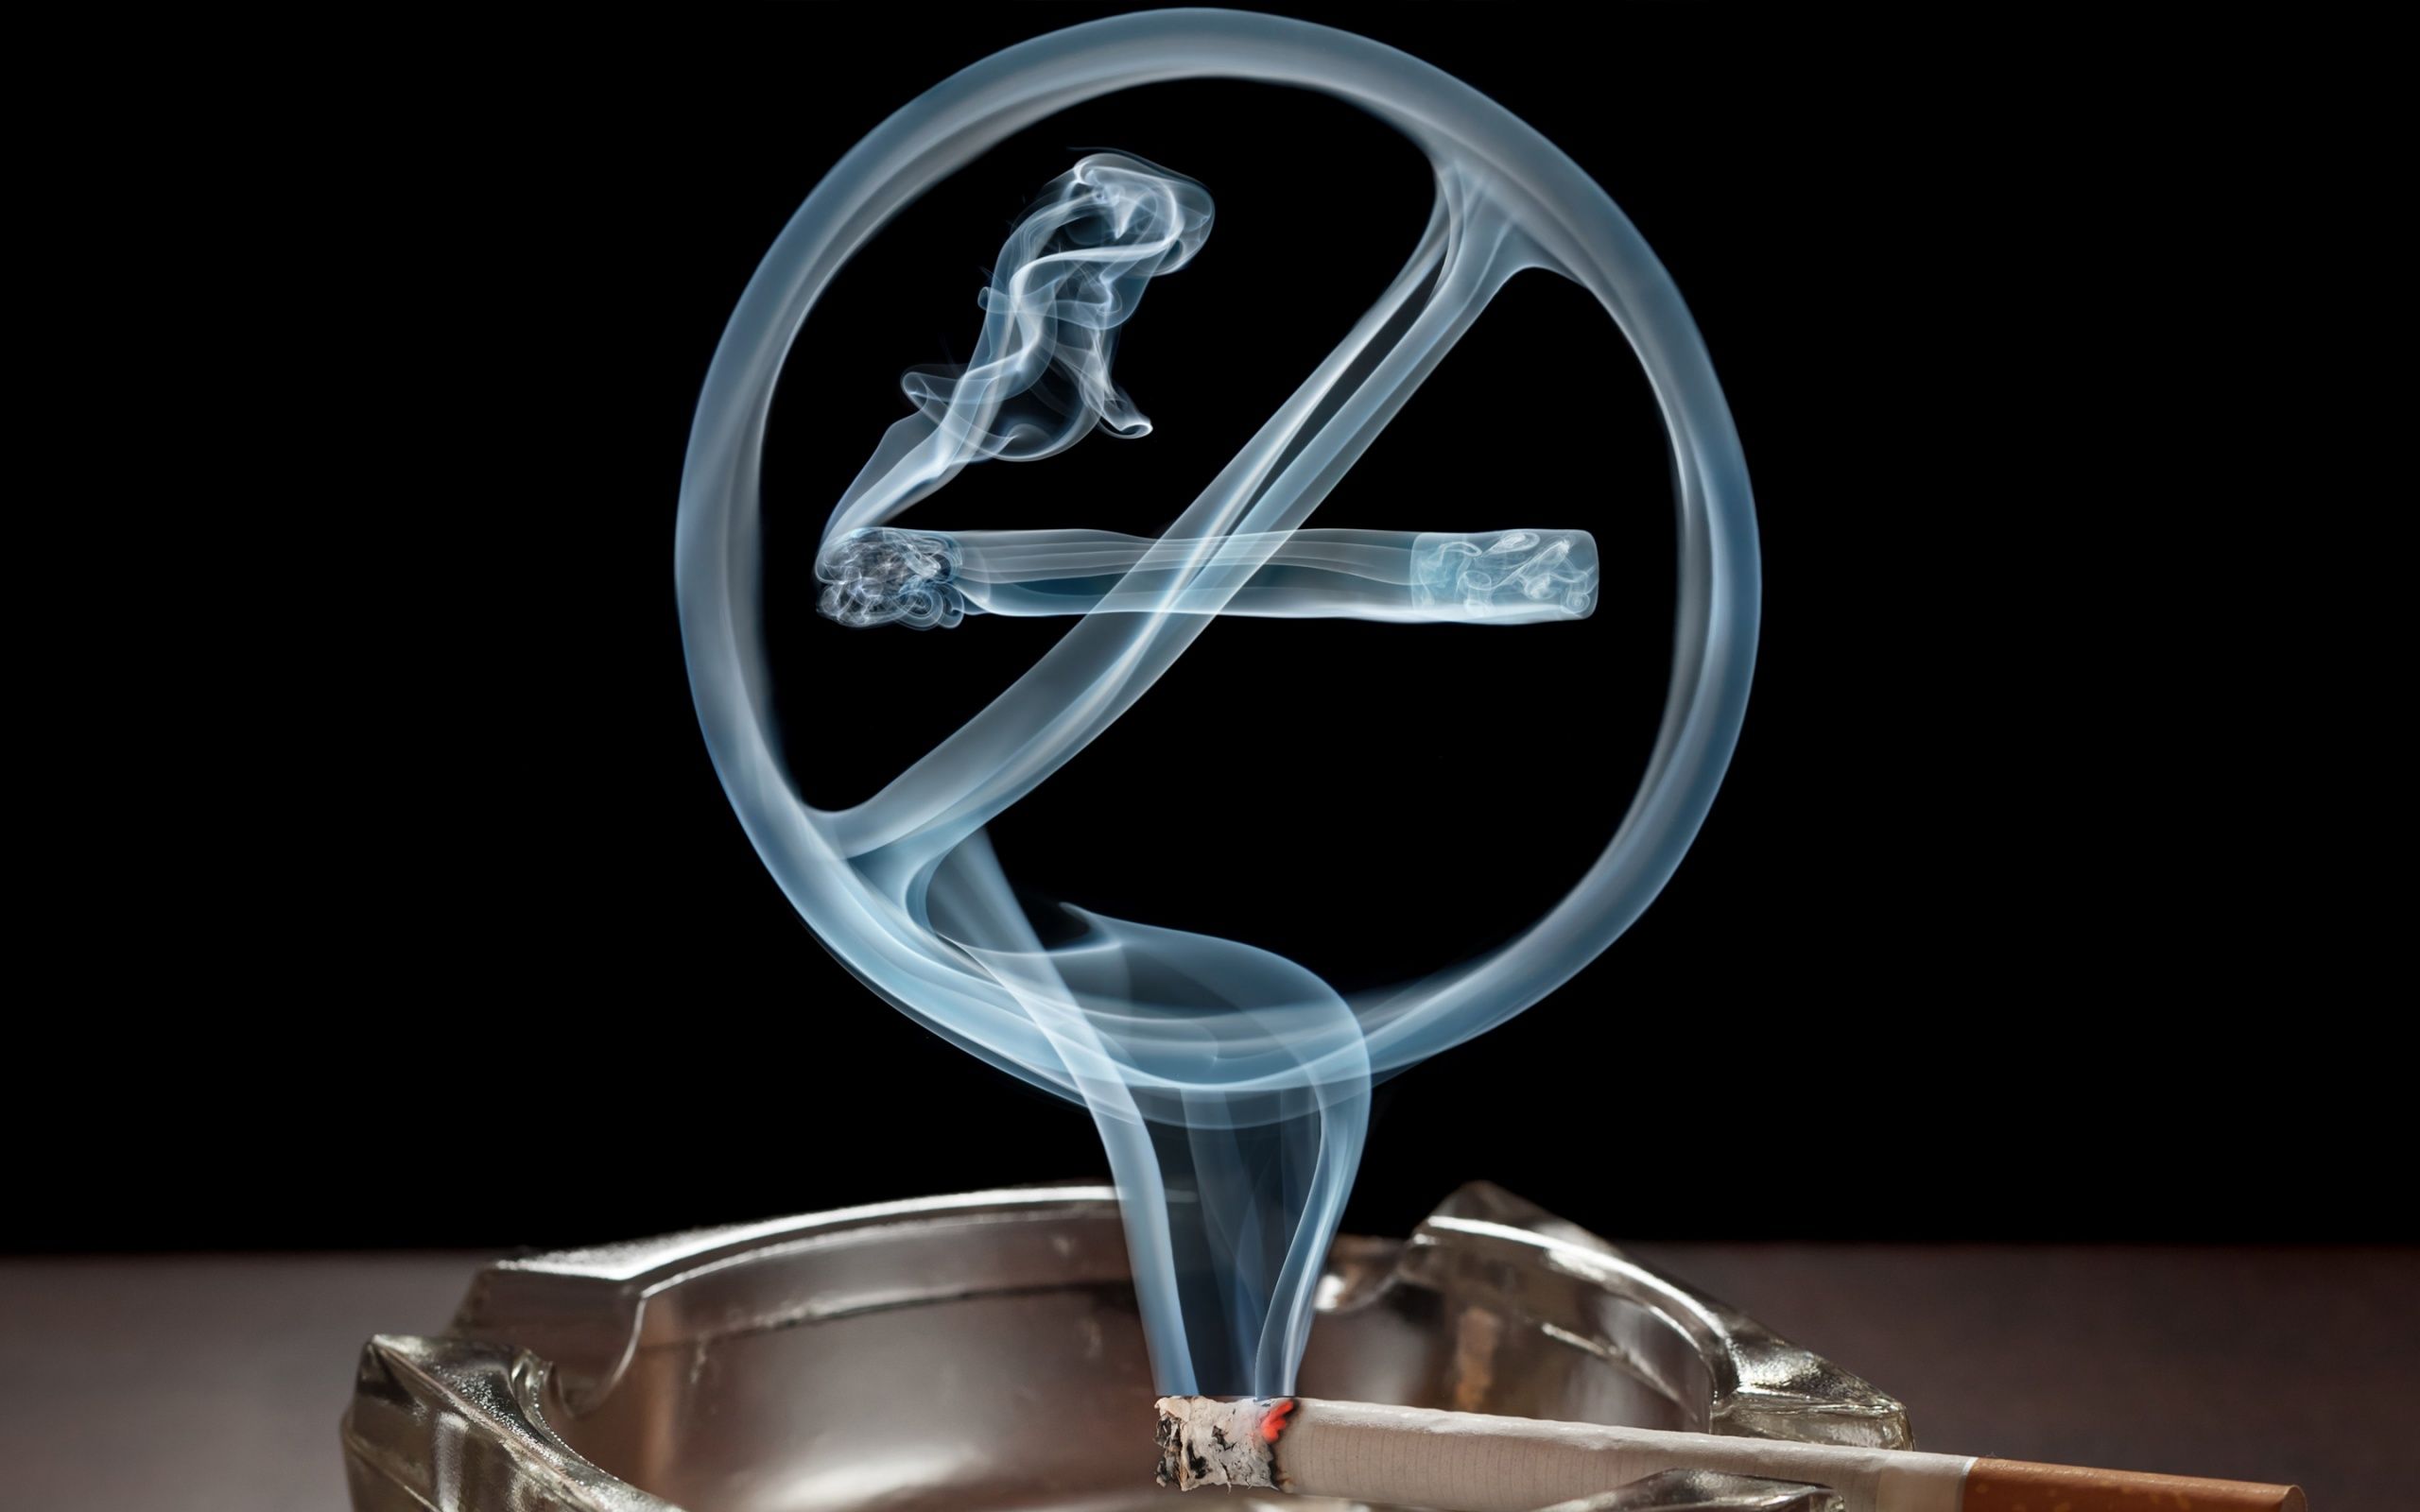 2 No Smoking HD Wallpapers | Backgrounds - Wallpaper Abyss